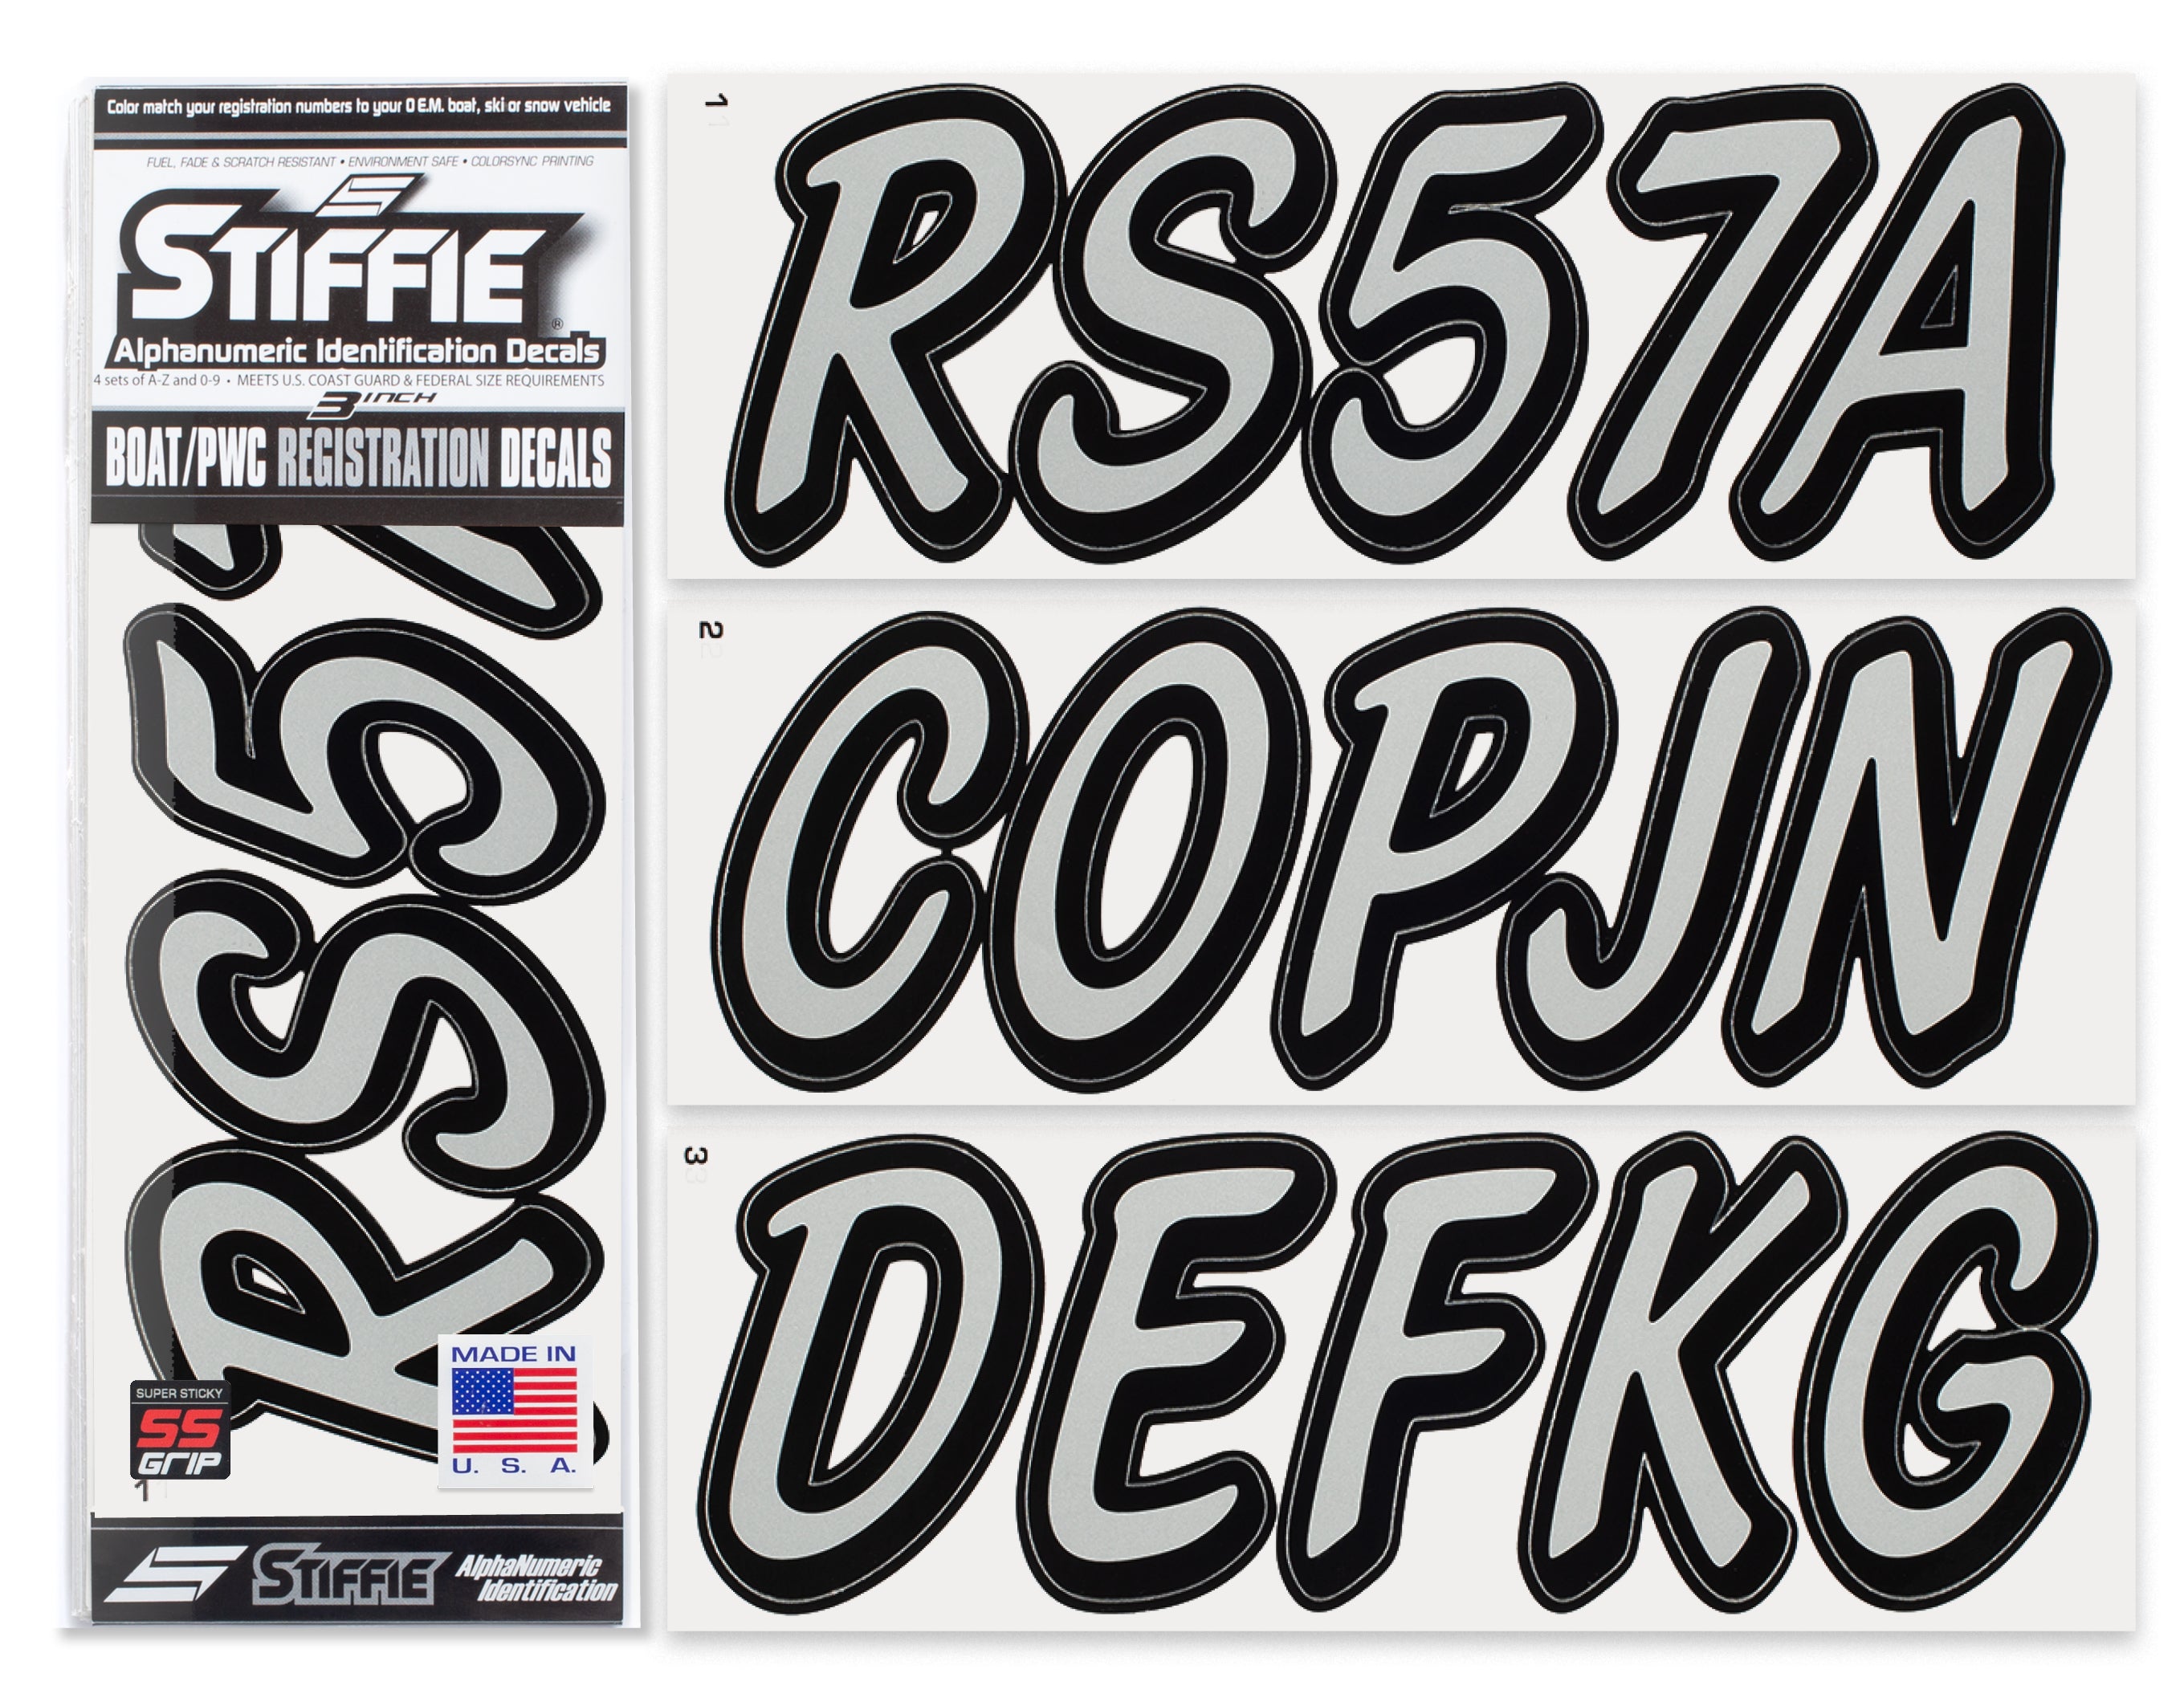 STIFFIE Whipline Solid Silver/Black Super Sticky 3" Alpha-Numeric Registration Identification Numbers Stickers Decals for Boats & Personal Watercraft